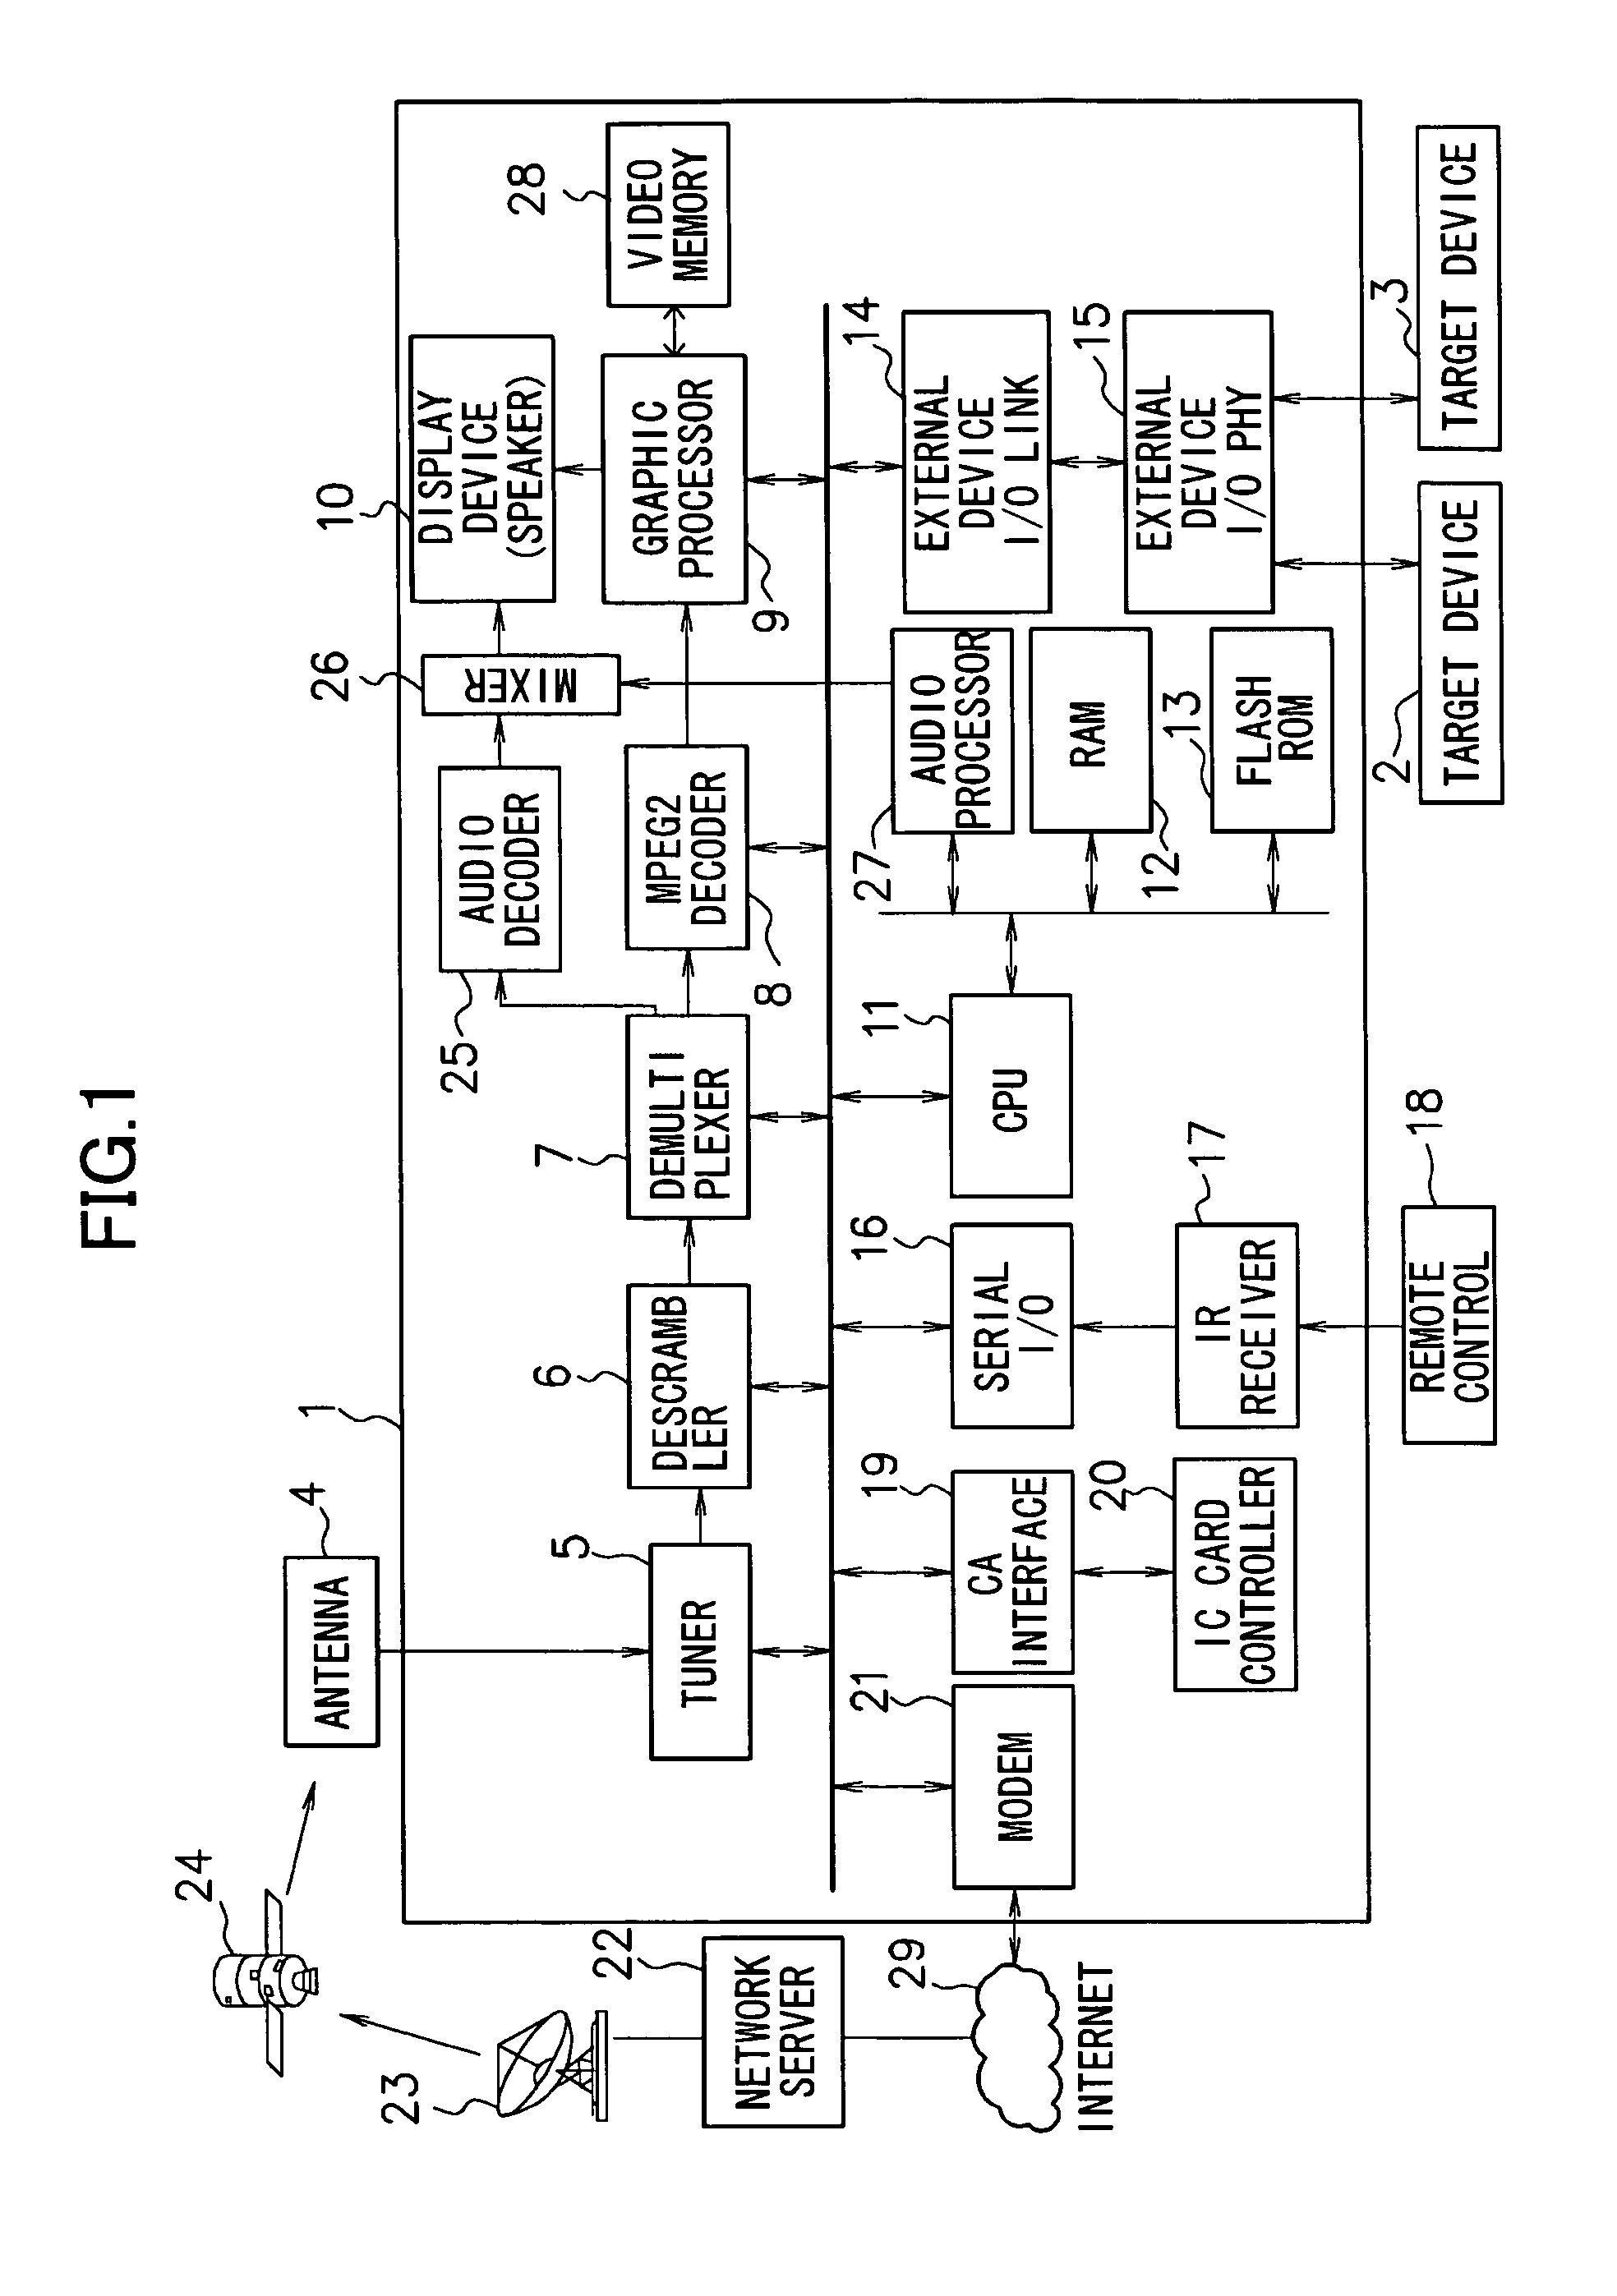 Broadcast receiving device and method of controlling a broadcast receiving device with controller for updating a panel element in a display